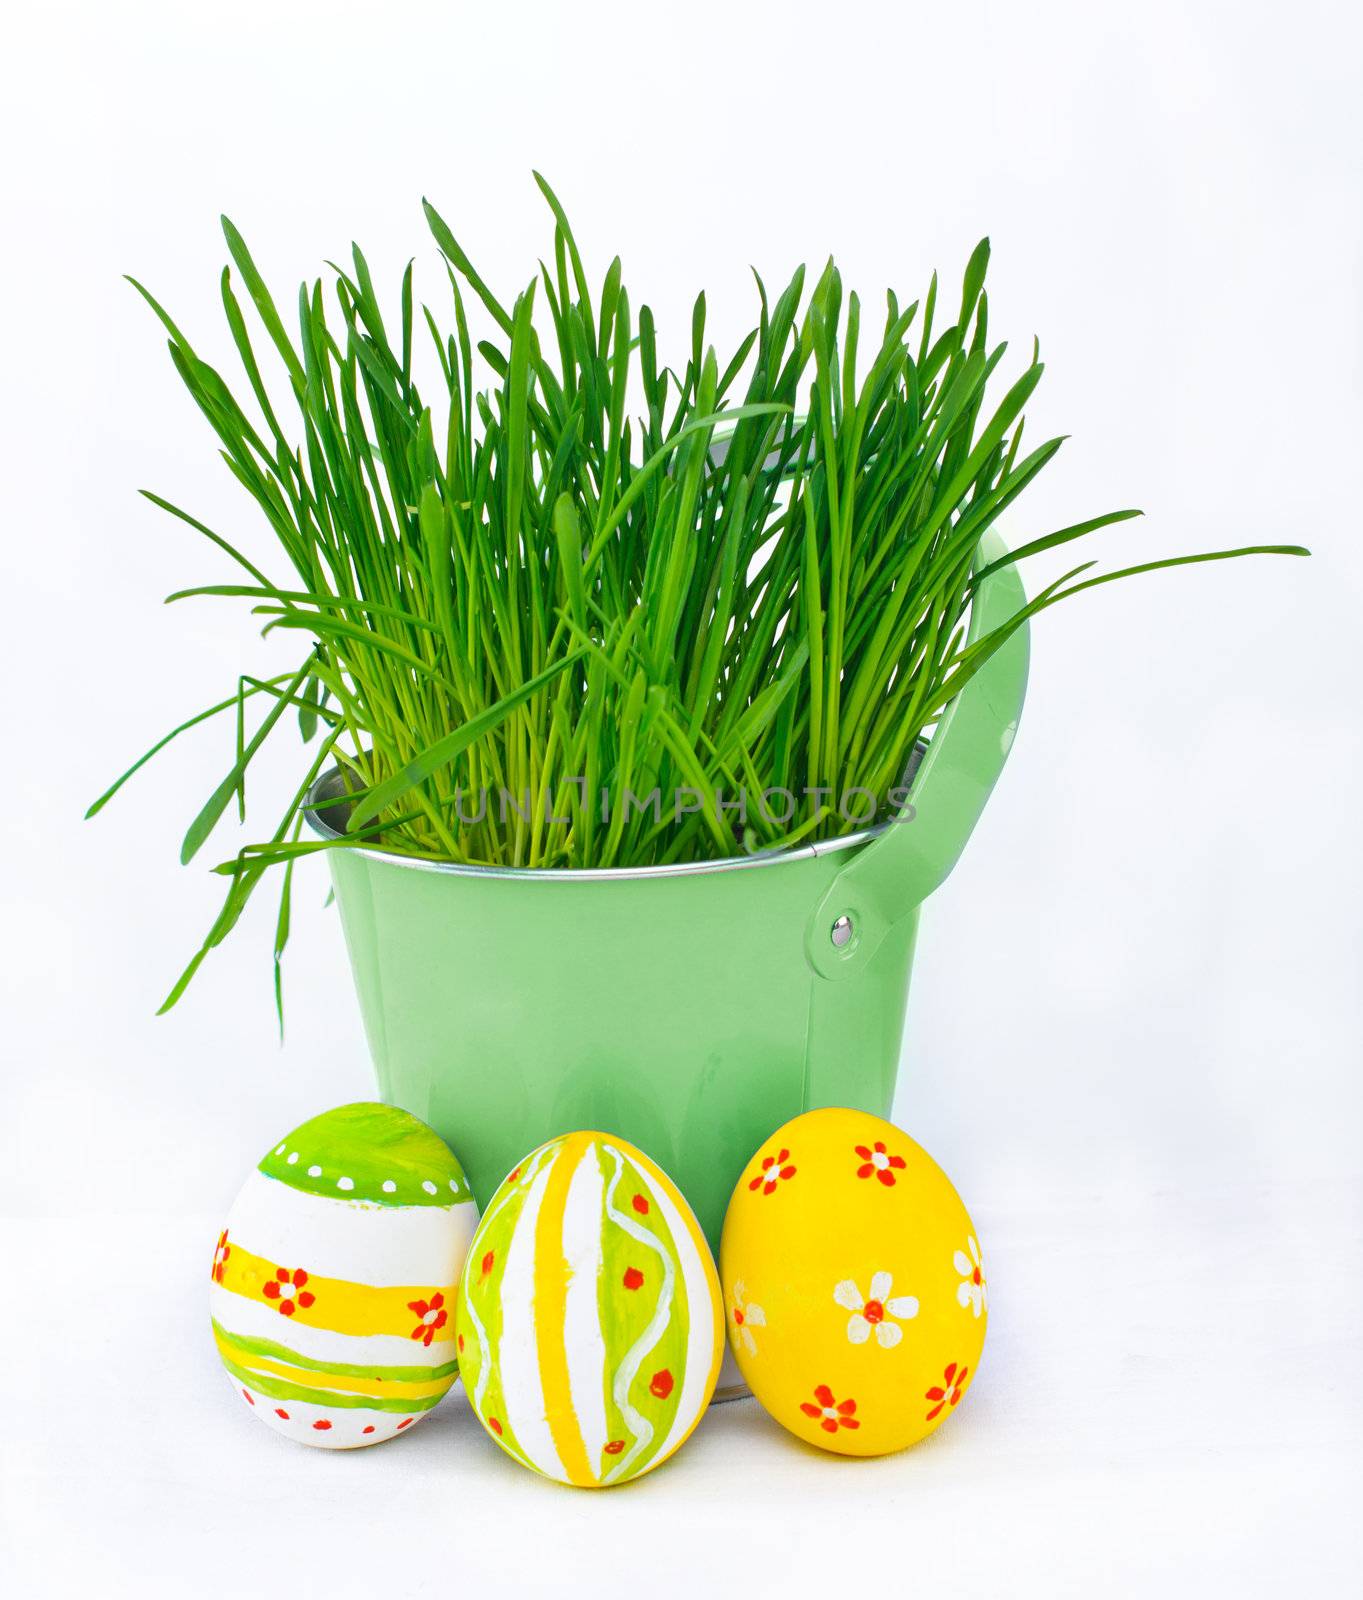 Colorful Easter eggs next to the bucket with the spring grass by maxoliki